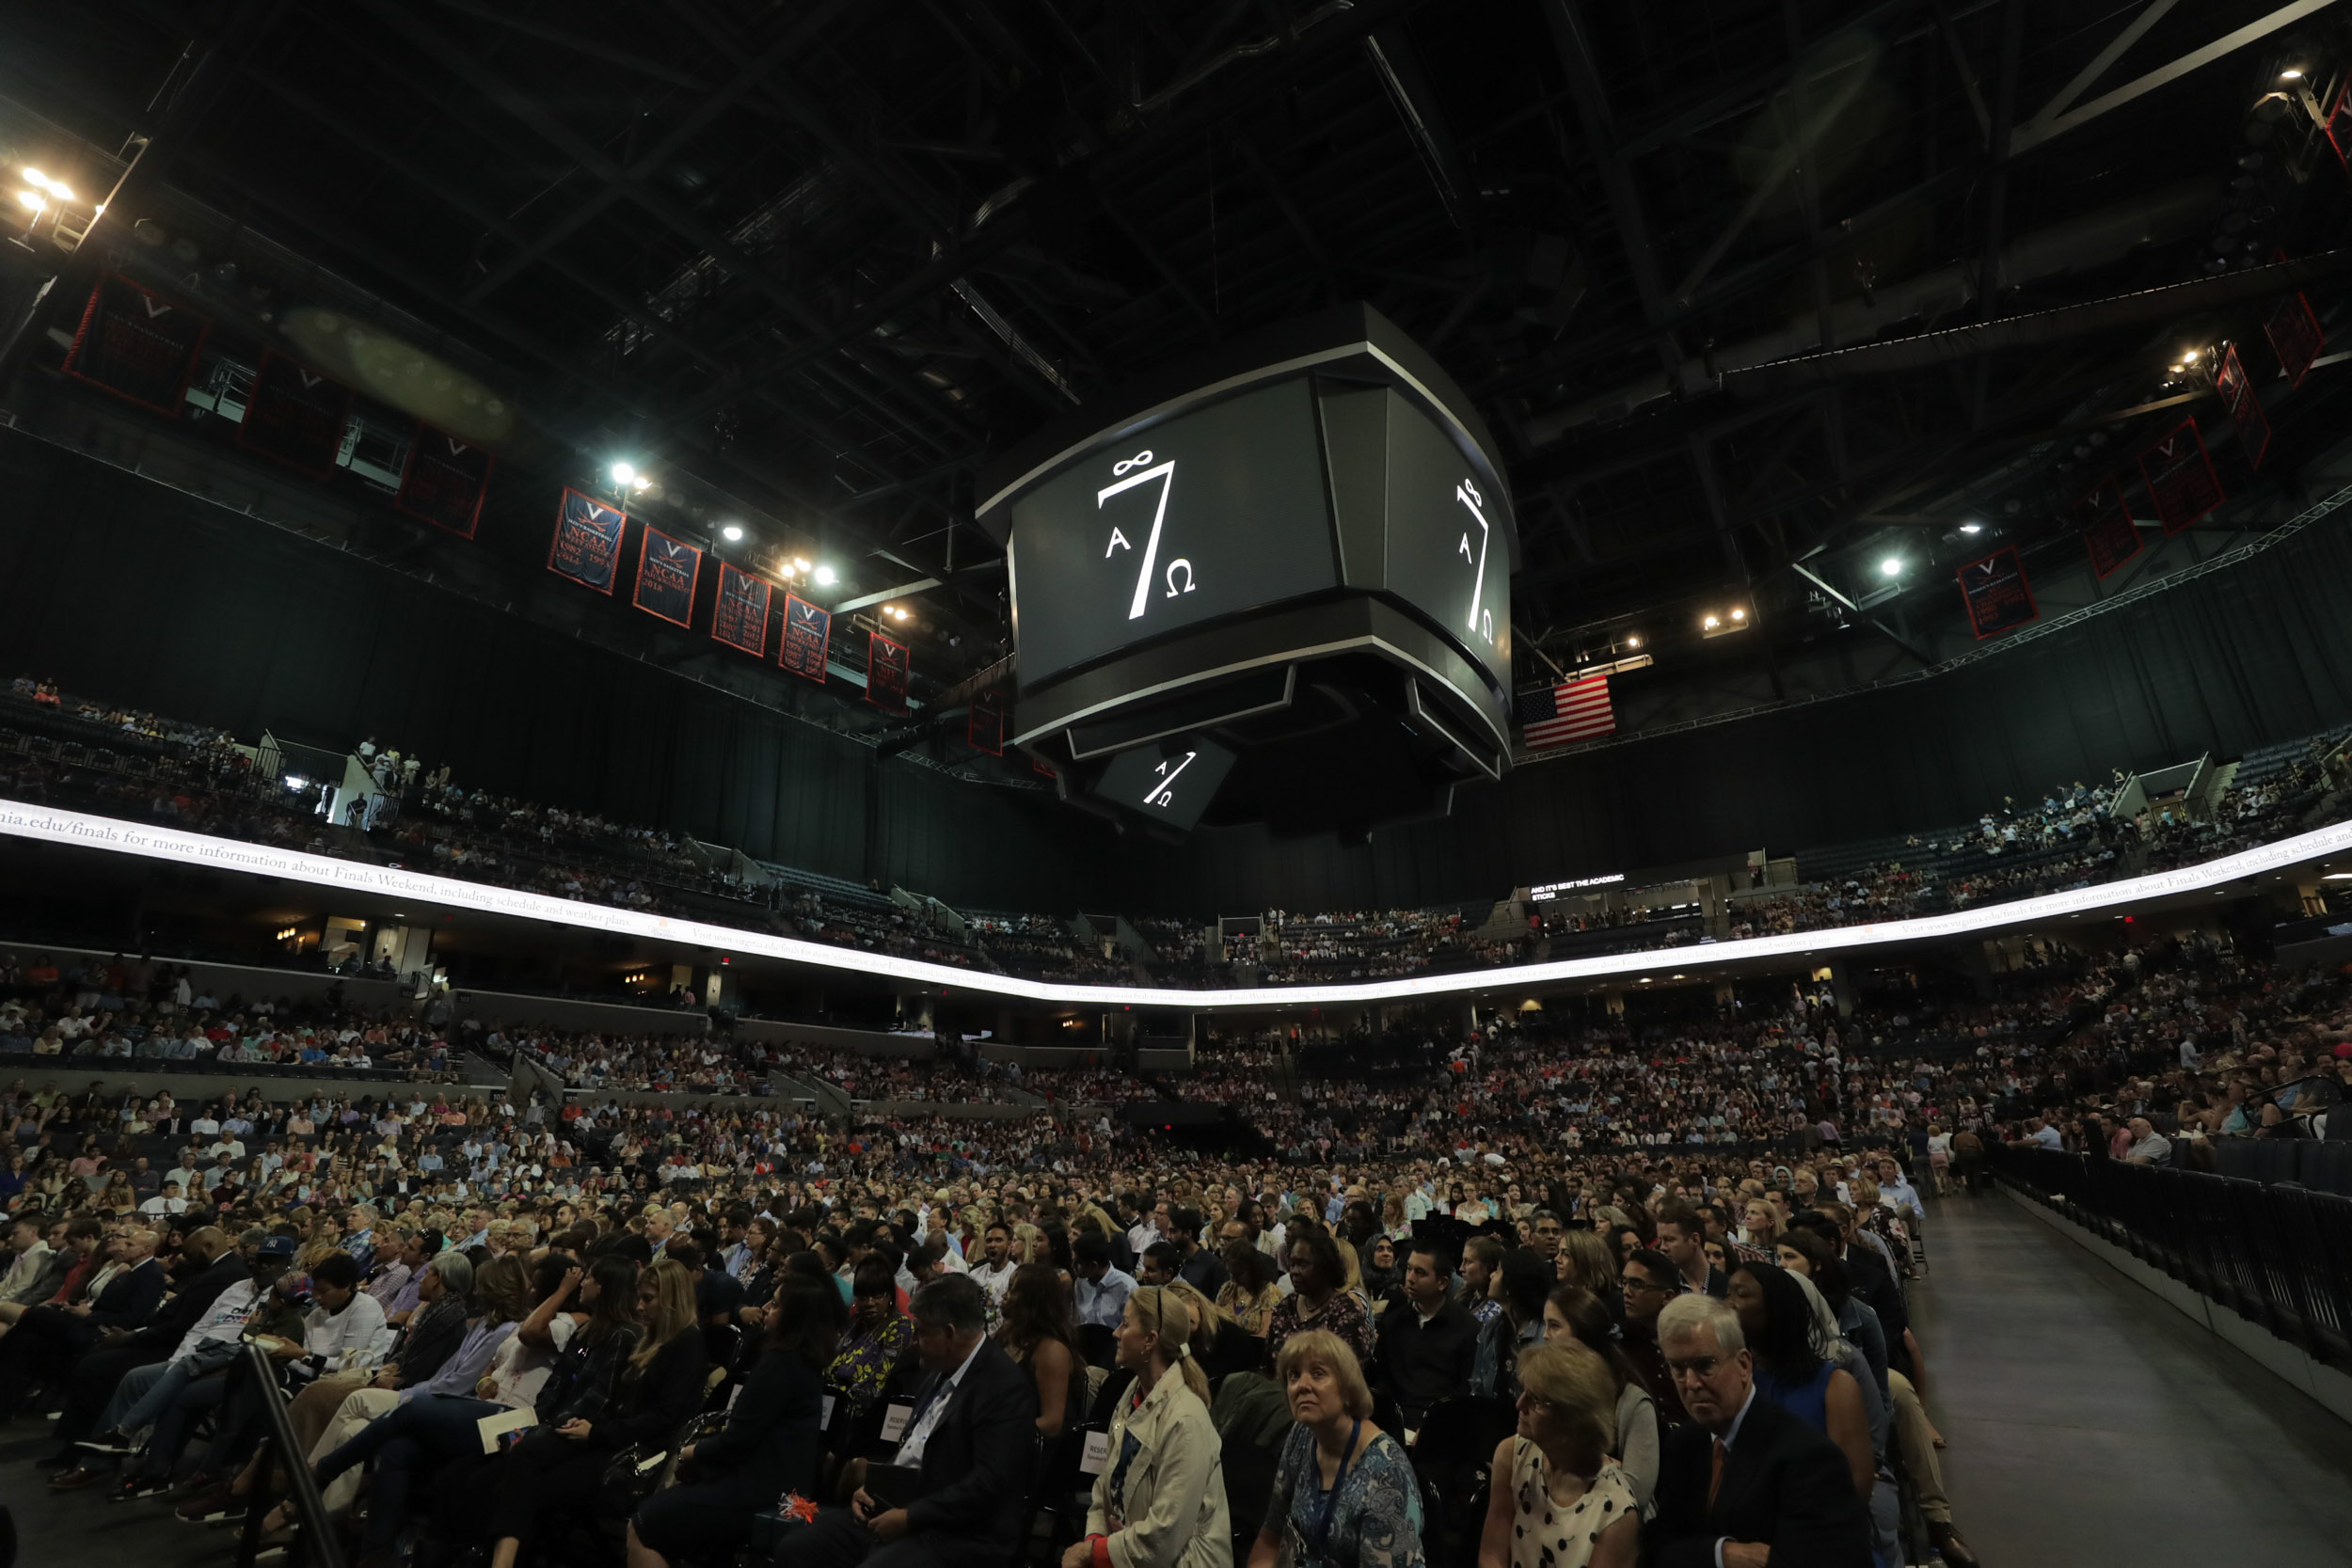 John paul jones arena filled with people with the 7 society banner on the jumbo tron